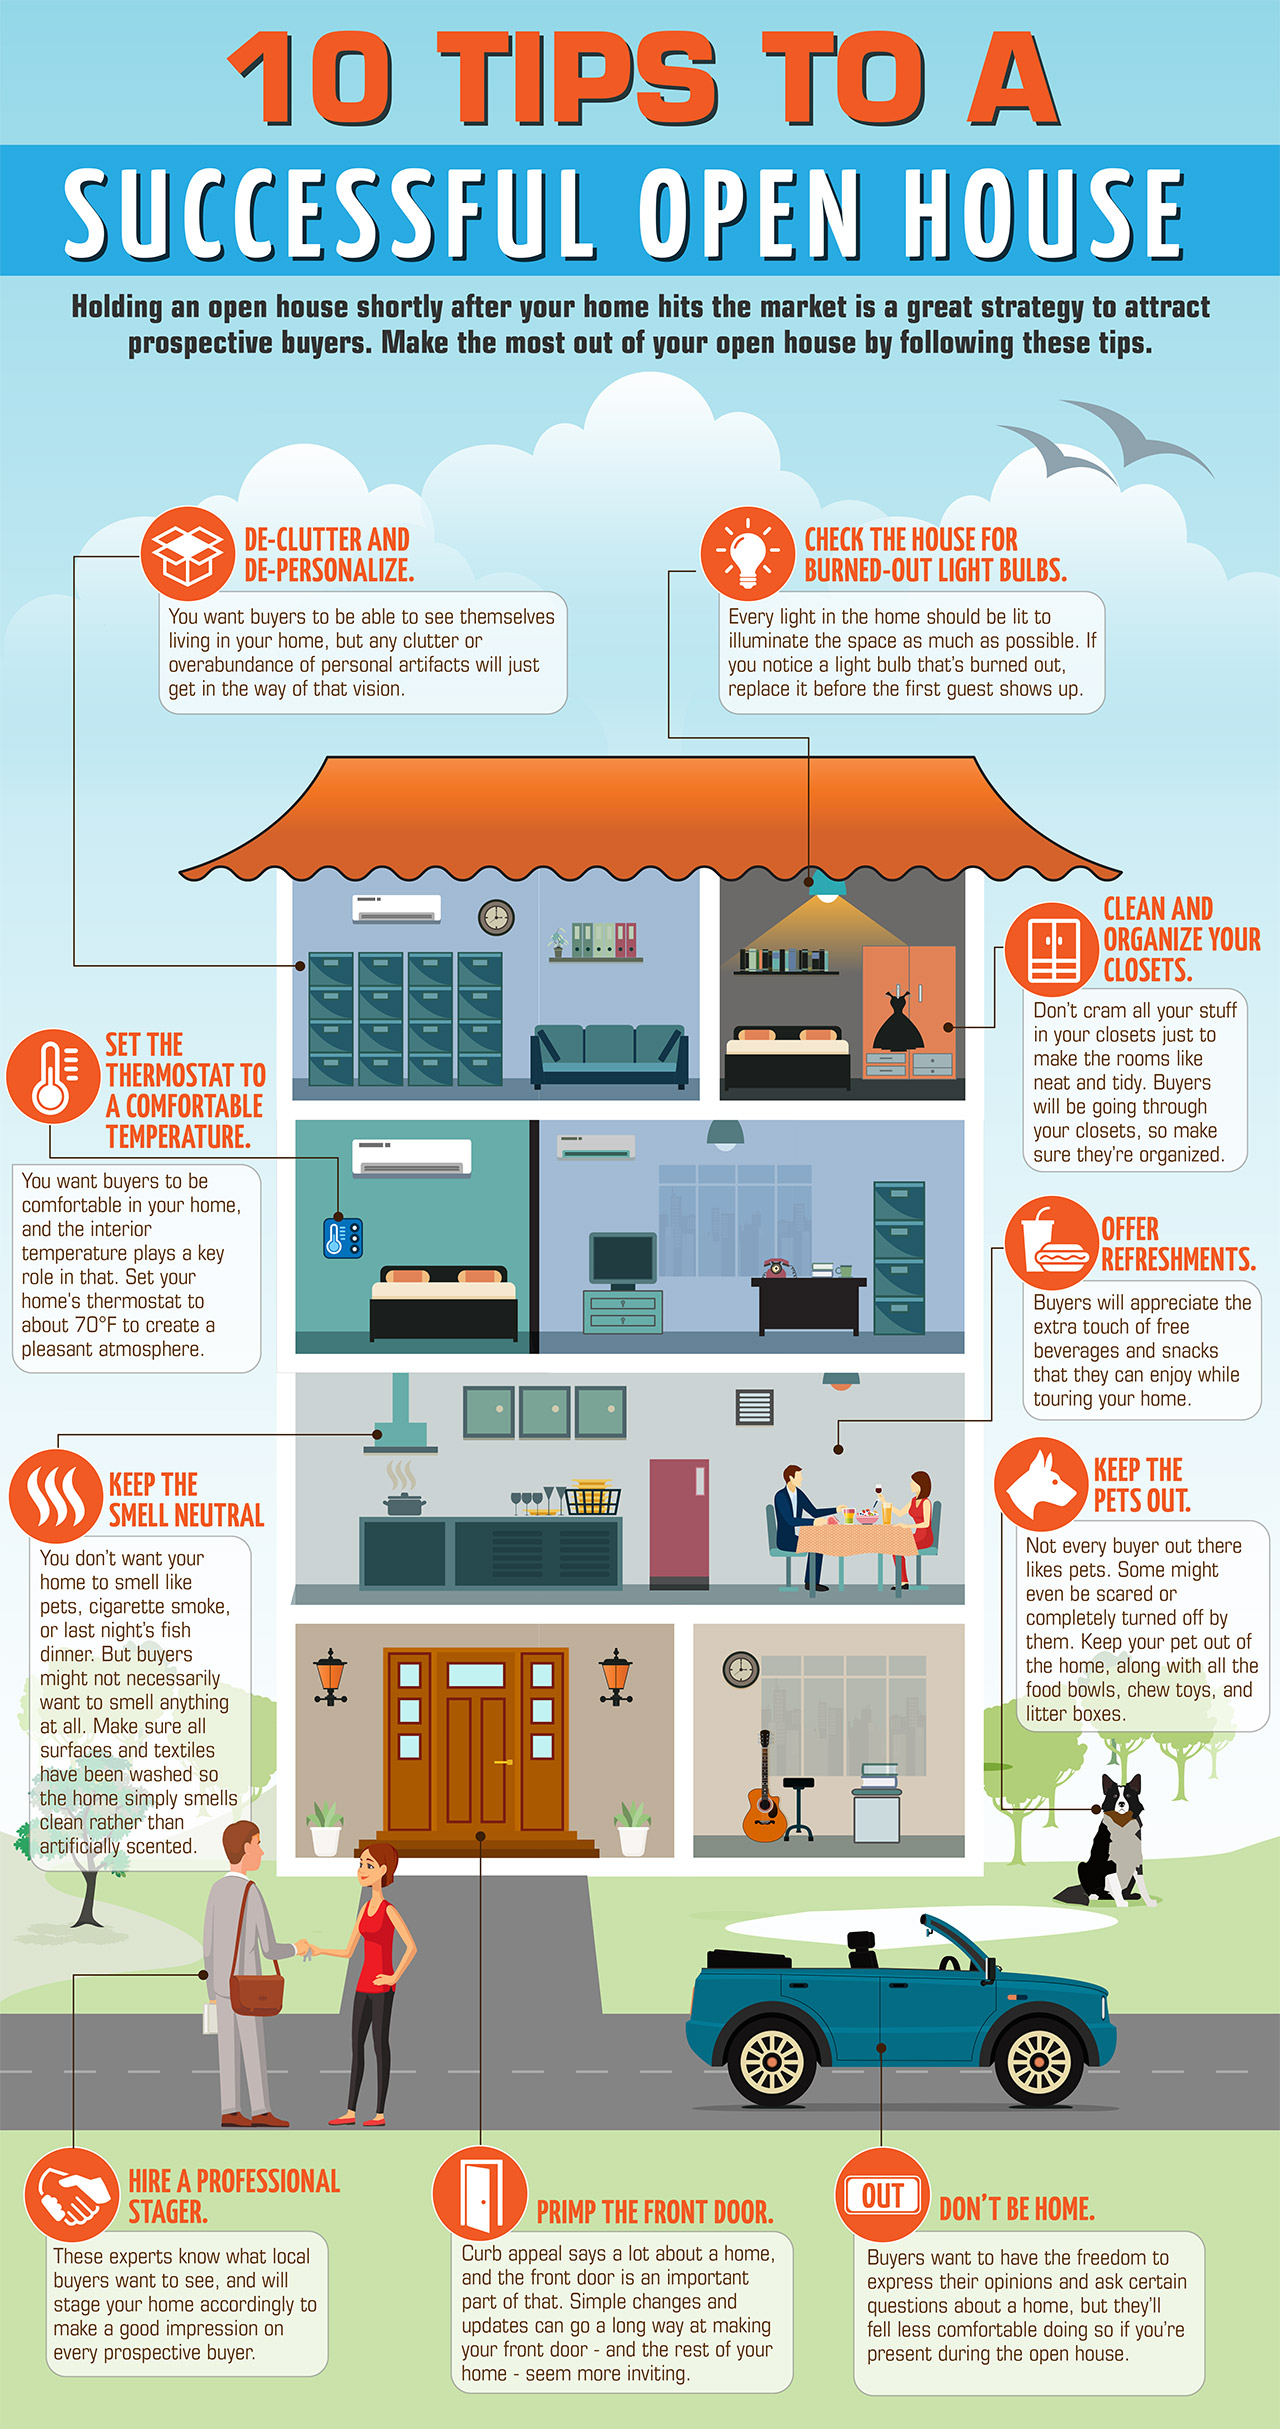 10-tips-to-a-successful-open-house-infographic